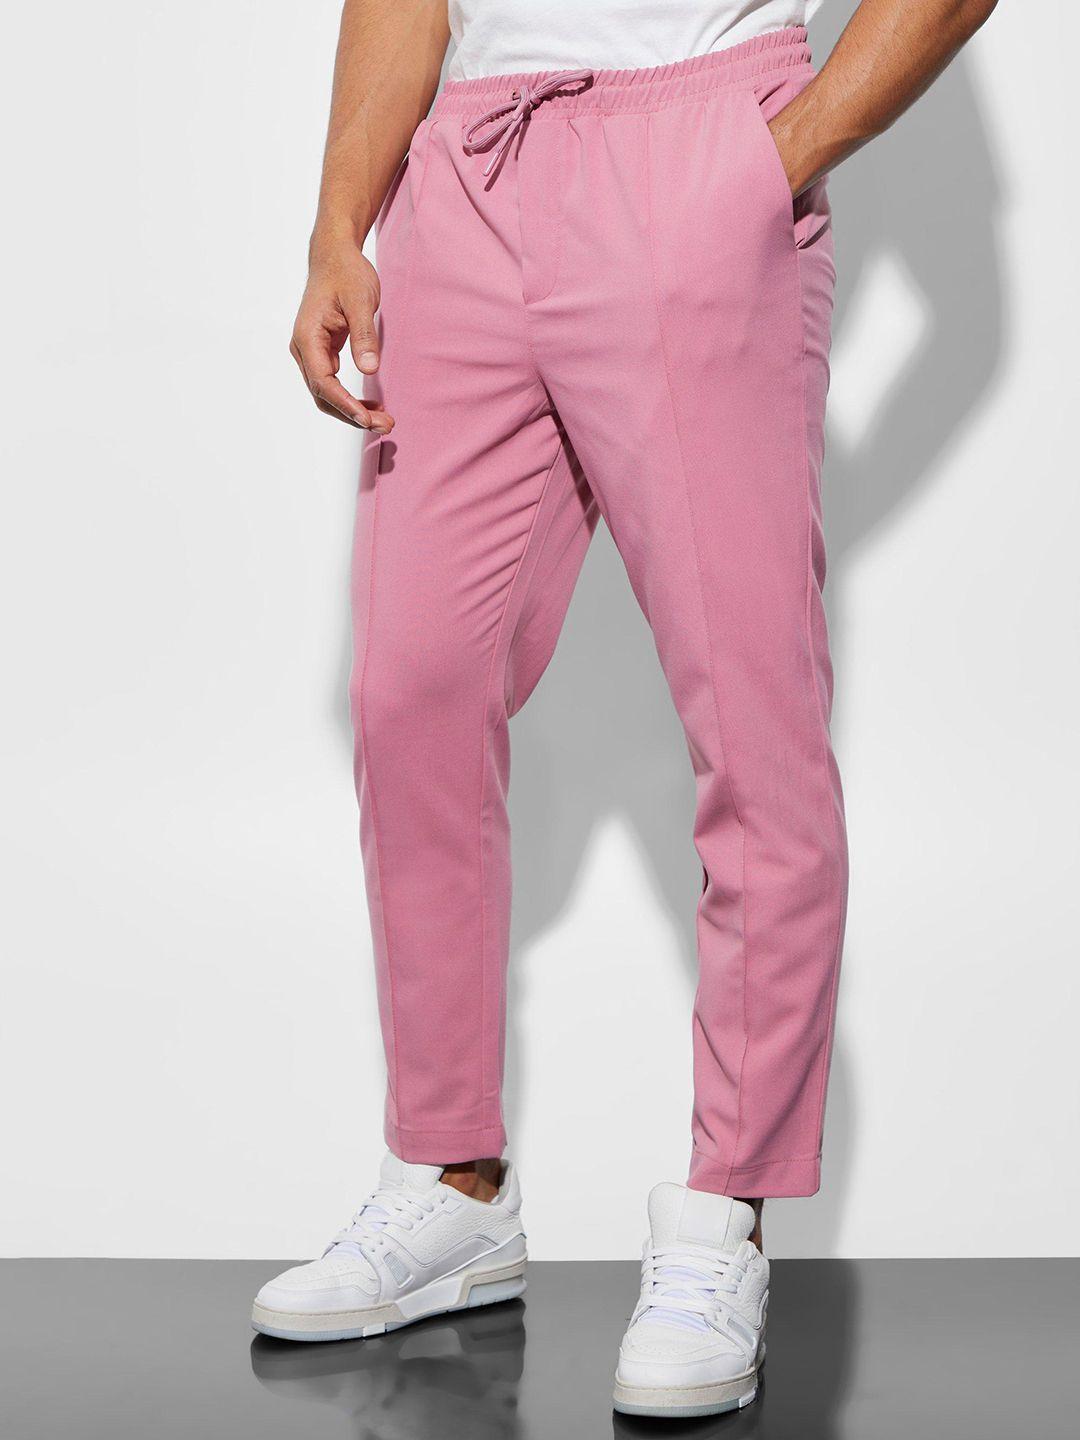 boohooman tapered pintuck trousers